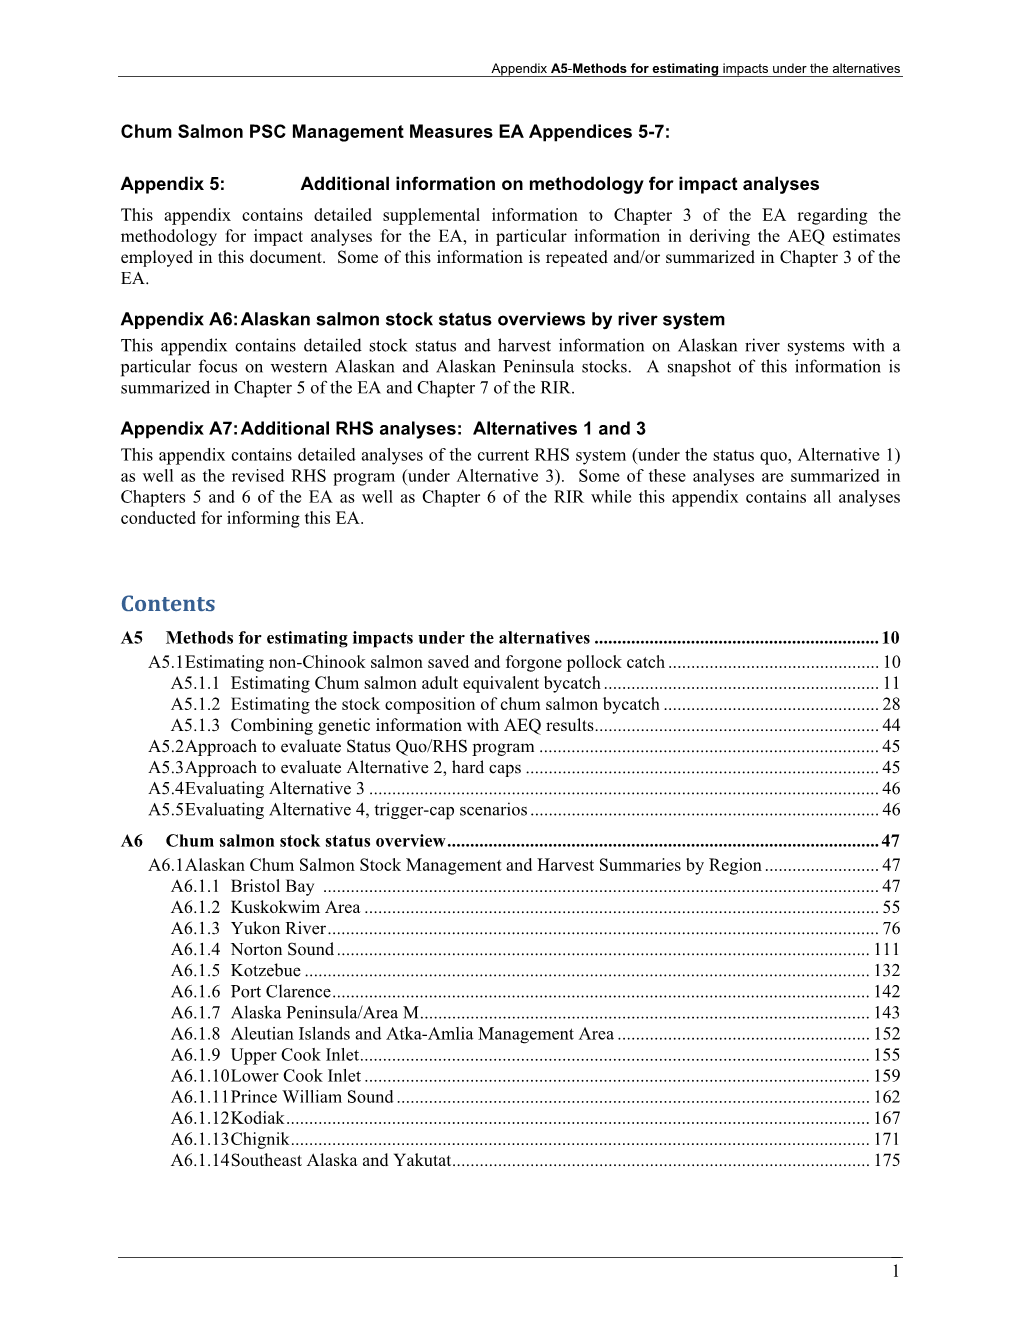 Contents A5 Methods for Estimating Impacts Under the Alternatives